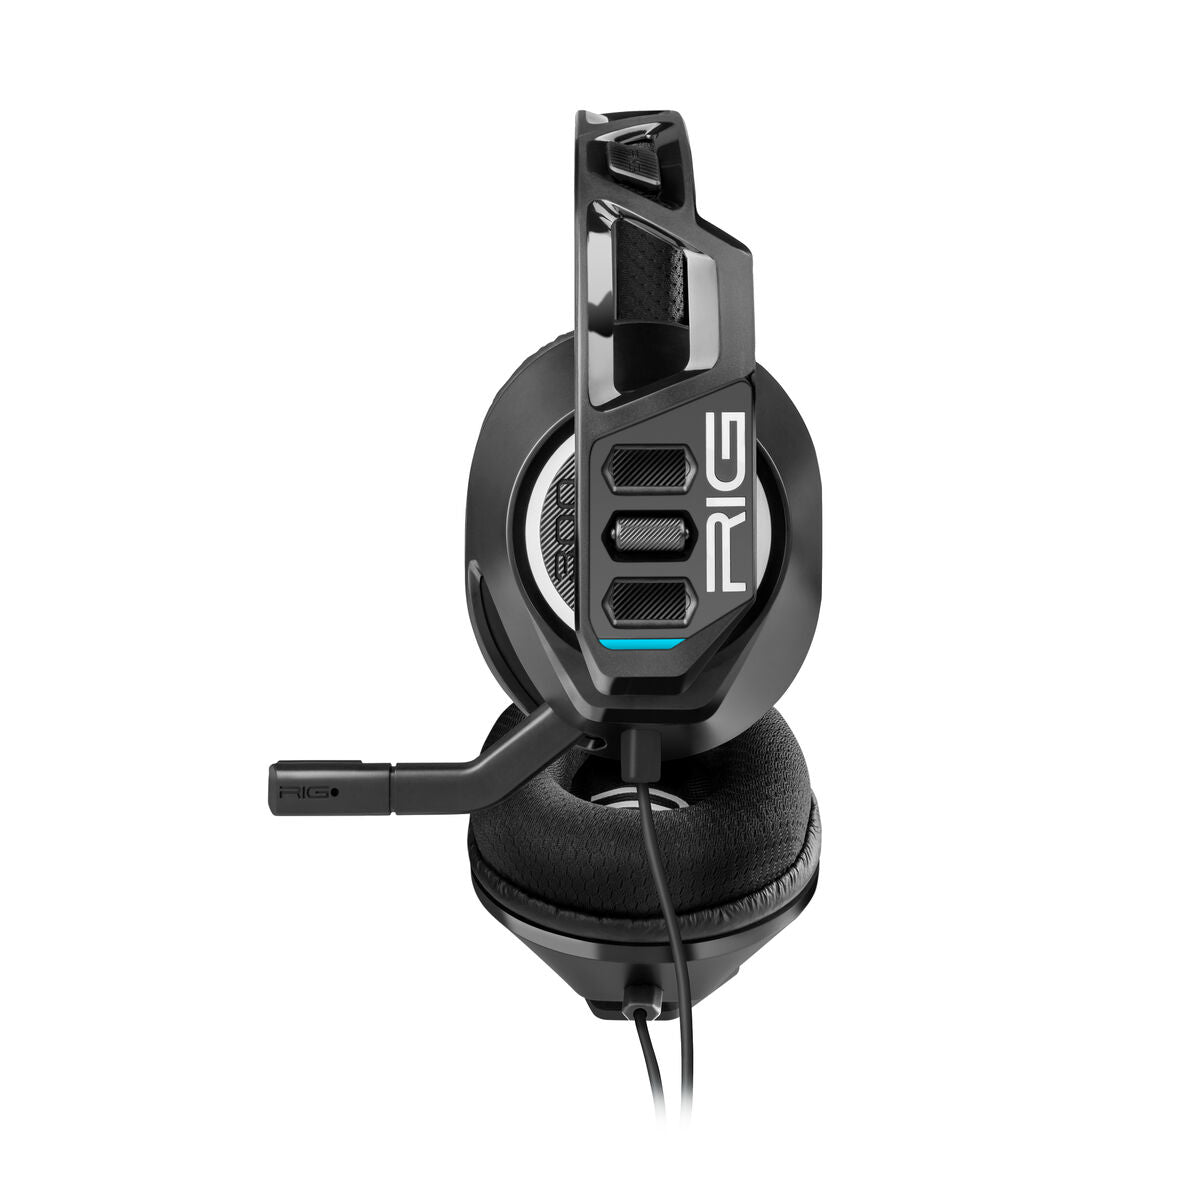 Headphones Nacon RIG 300HN Black, Nacon, Electronics, Mobile communication and accessories, headphones-nacon-rig-300hn-black, :Wired Headphones, :Wireless Headphones, Brand_Nacon, category-reference-2609, category-reference-2642, category-reference-2847, category-reference-t-19653, category-reference-t-21312, category-reference-t-4036, category-reference-t-4037, computers / peripherals, Condition_NEW, entertainment, gadget, music, office, Price_20 - 50, telephones & tablets, Teleworking, RiotNook